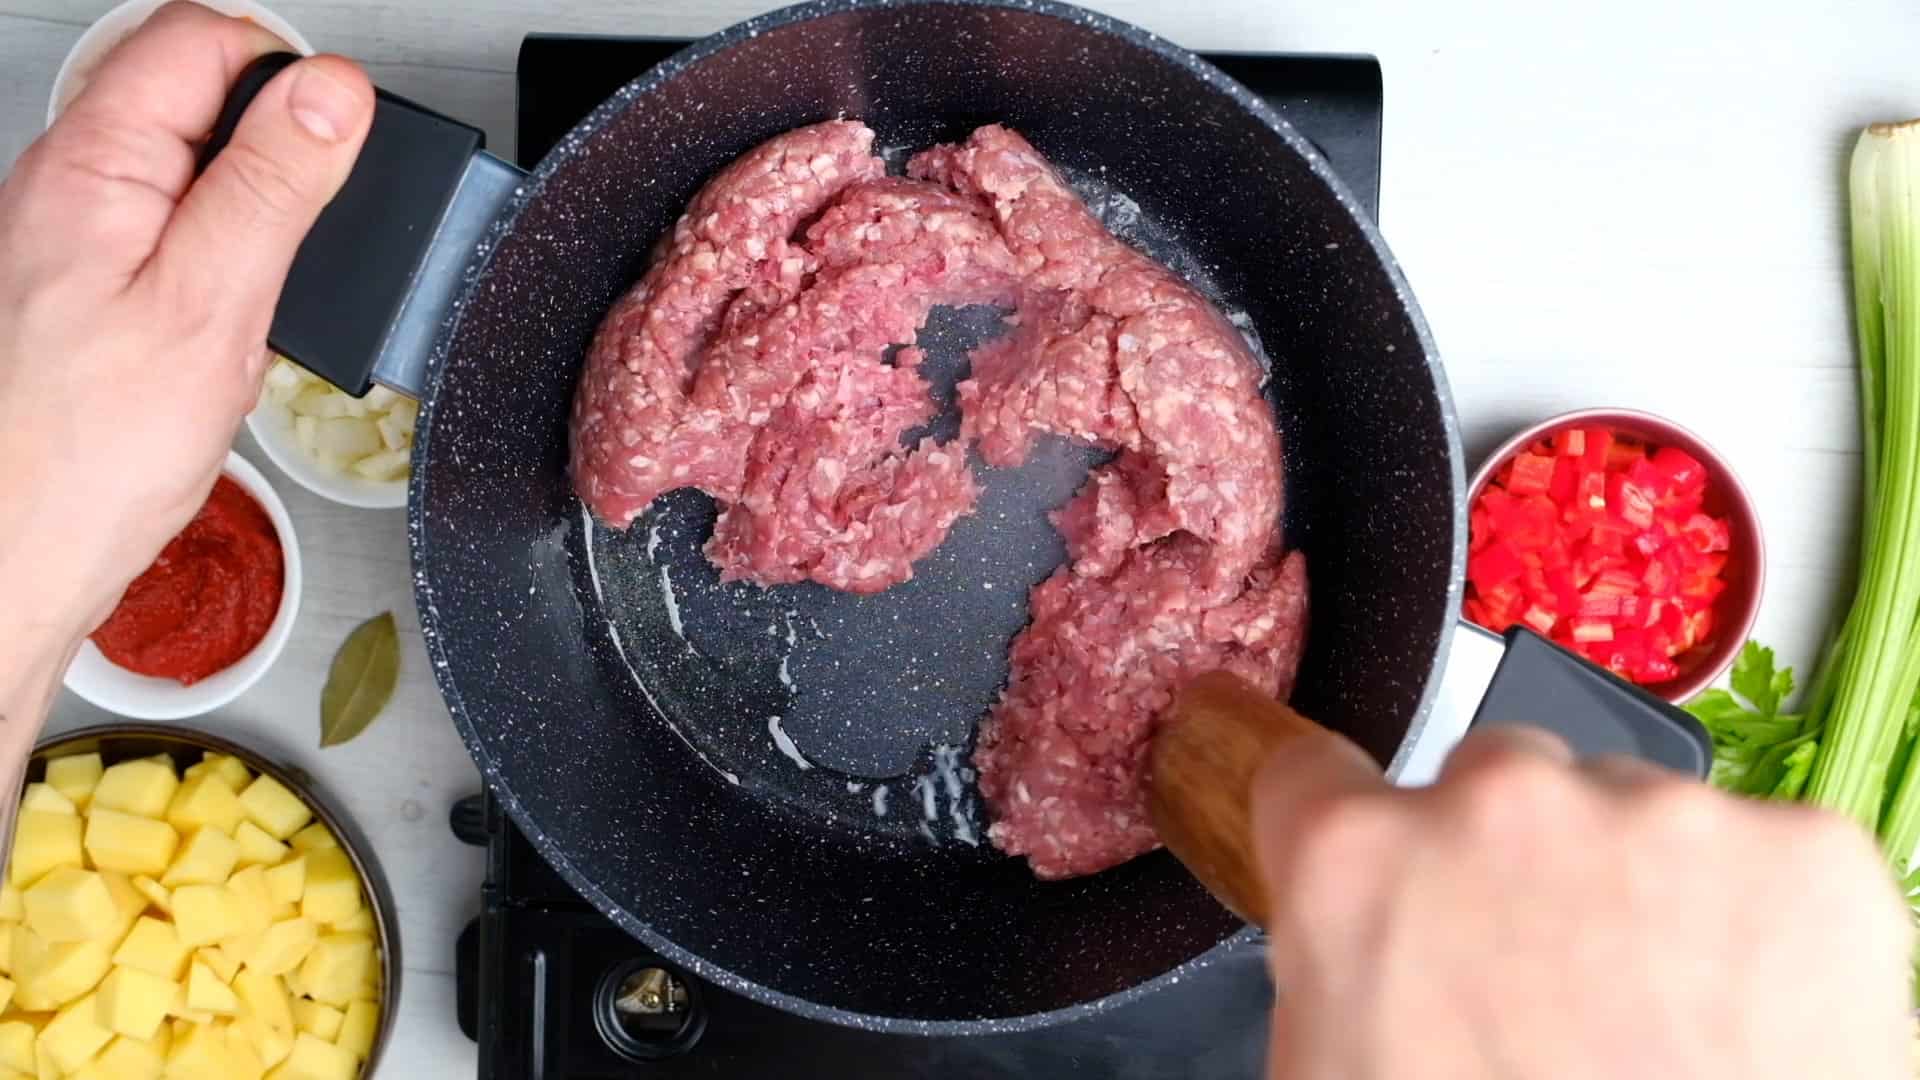 Cooking in a non-stick pan.